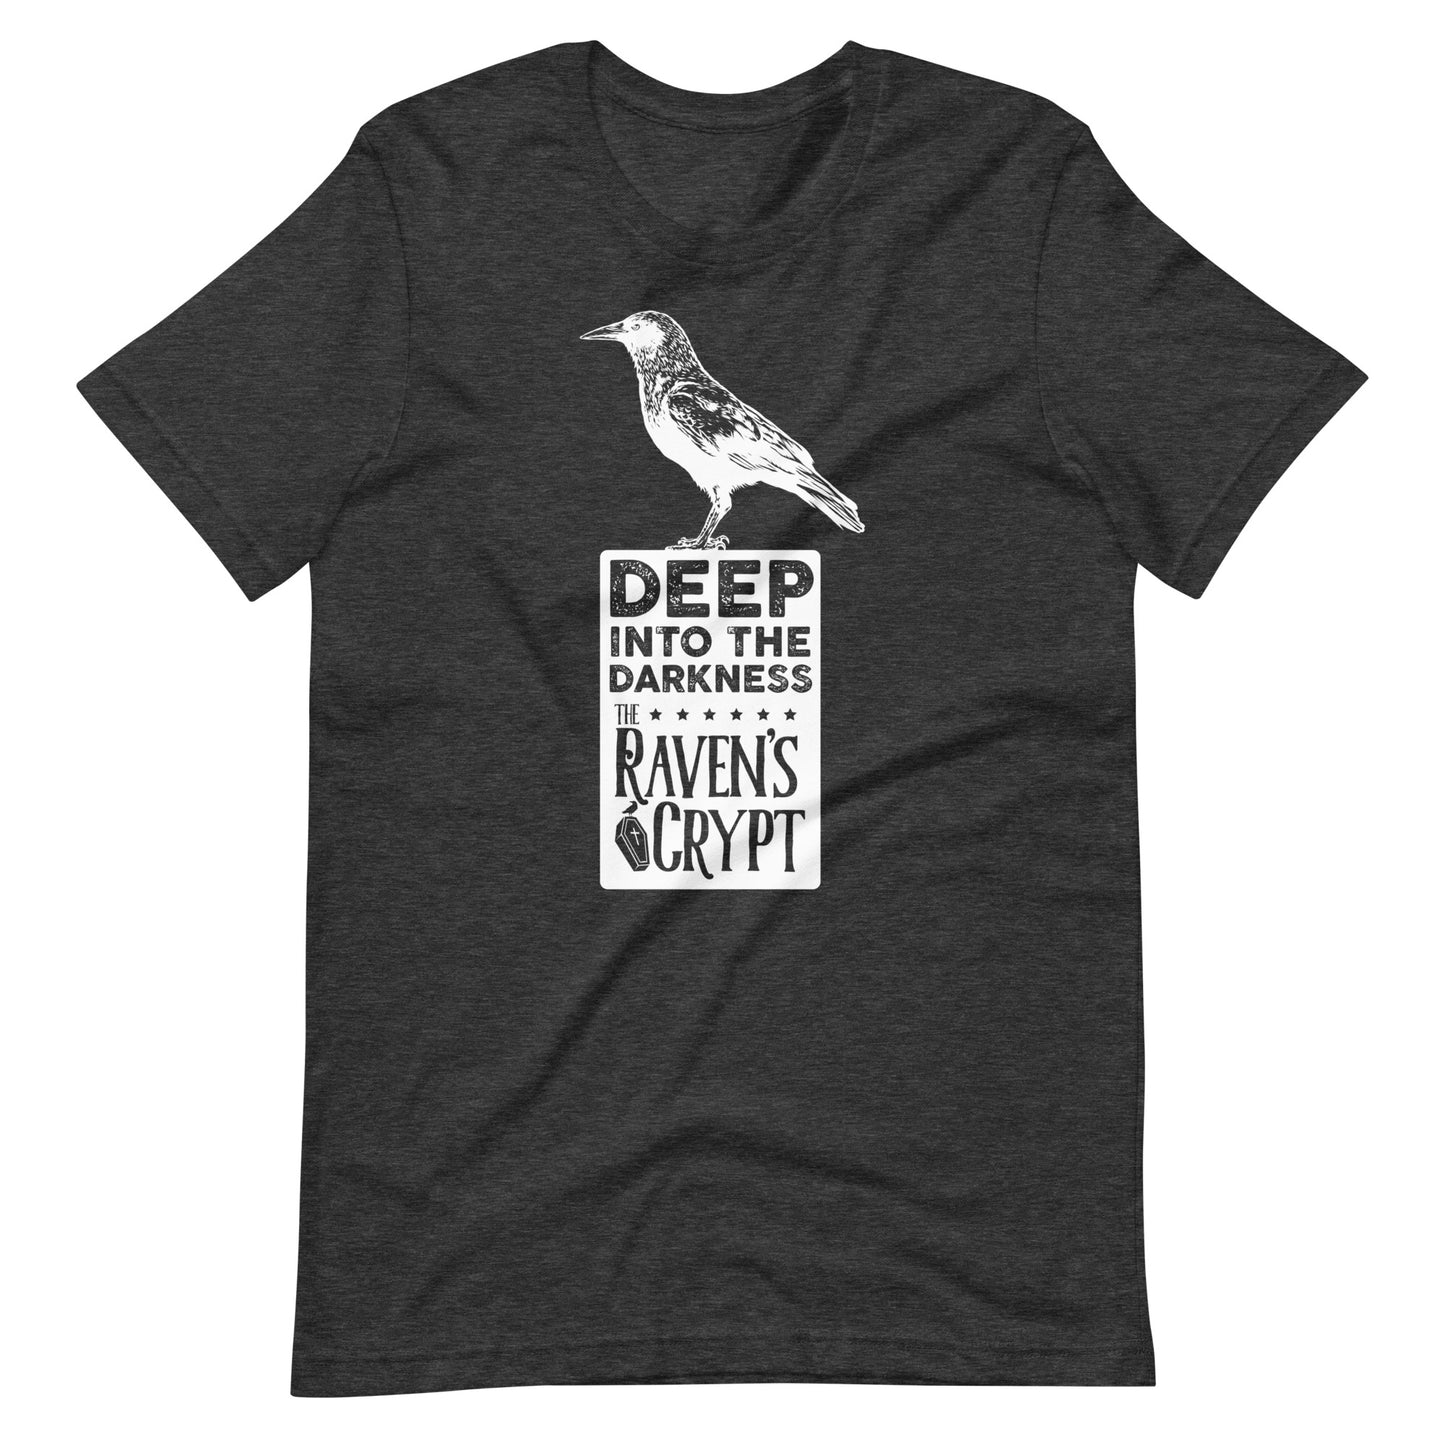 Deep Into the Darkness Crypt 2 - Men's t-shirt - Dark Gray Heather Front